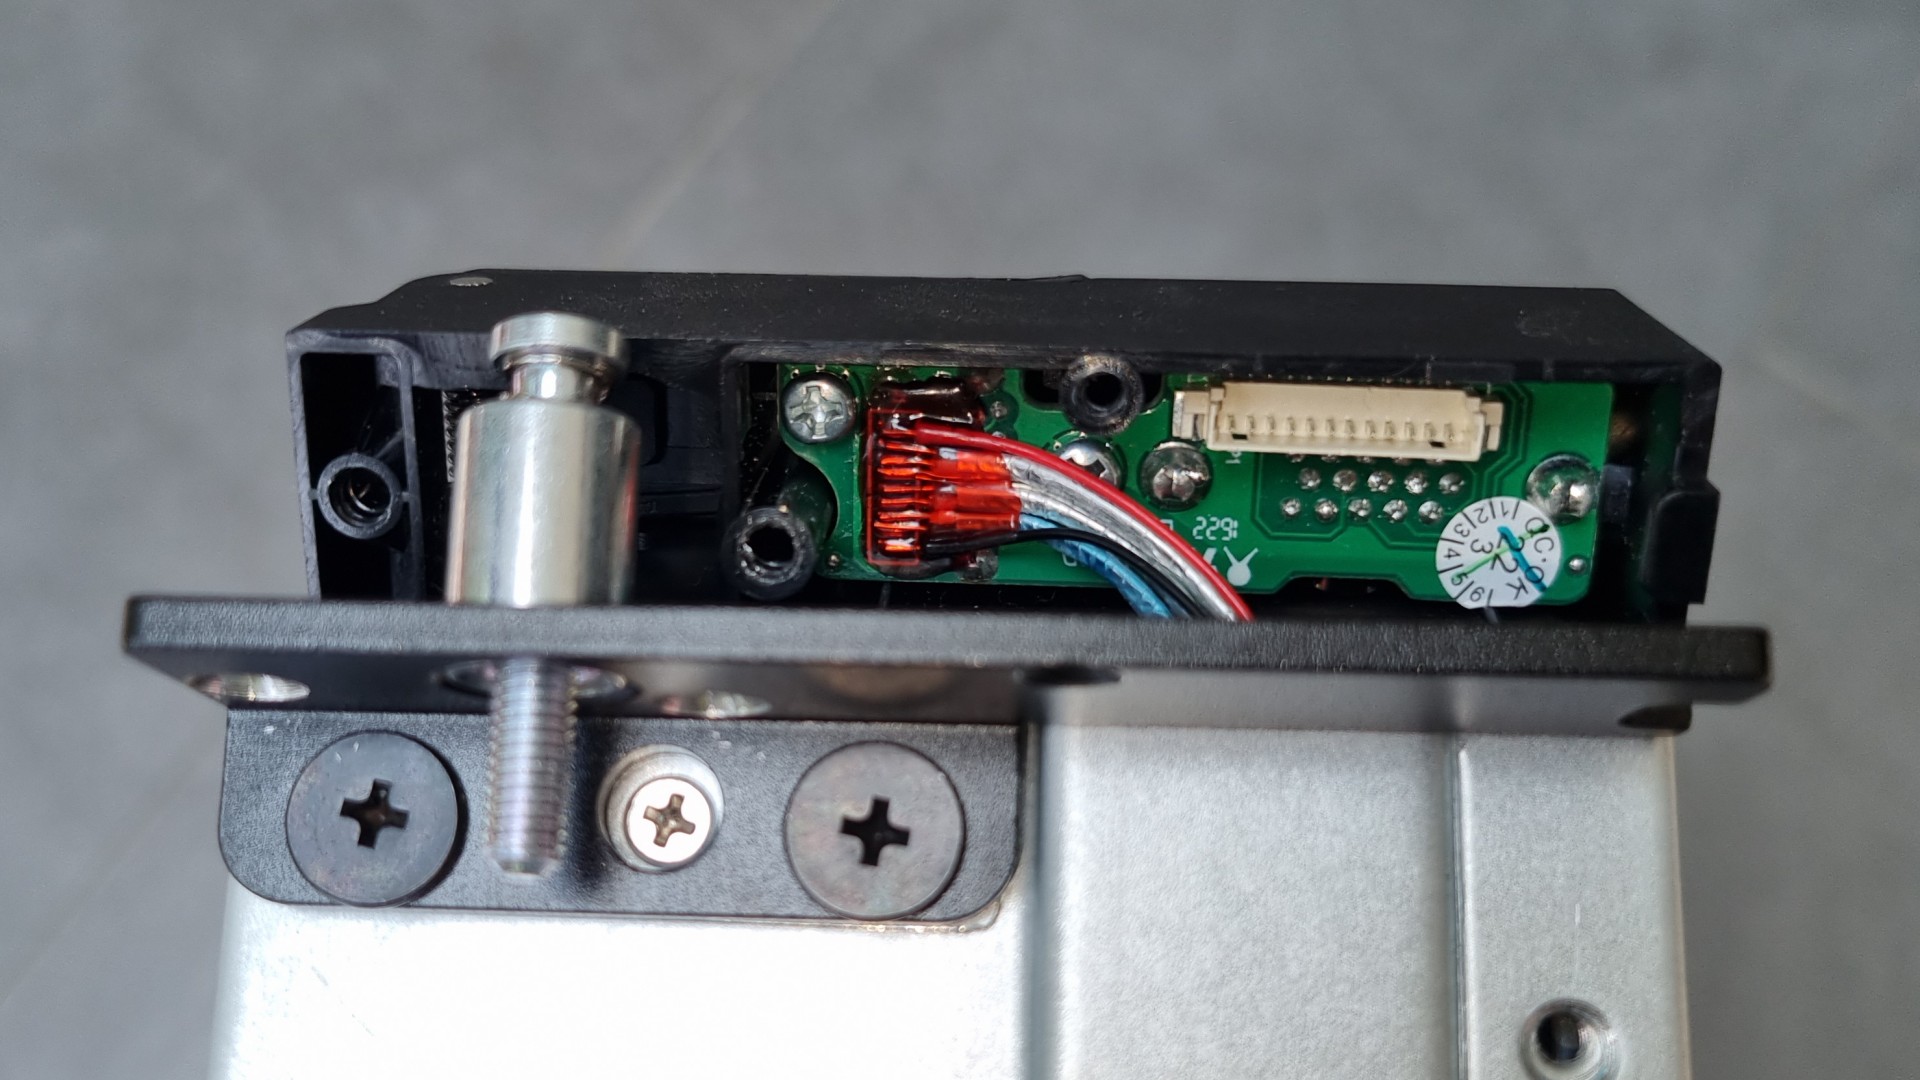 The VGA socket on the right ear of the Innovision M24306 is not connected.